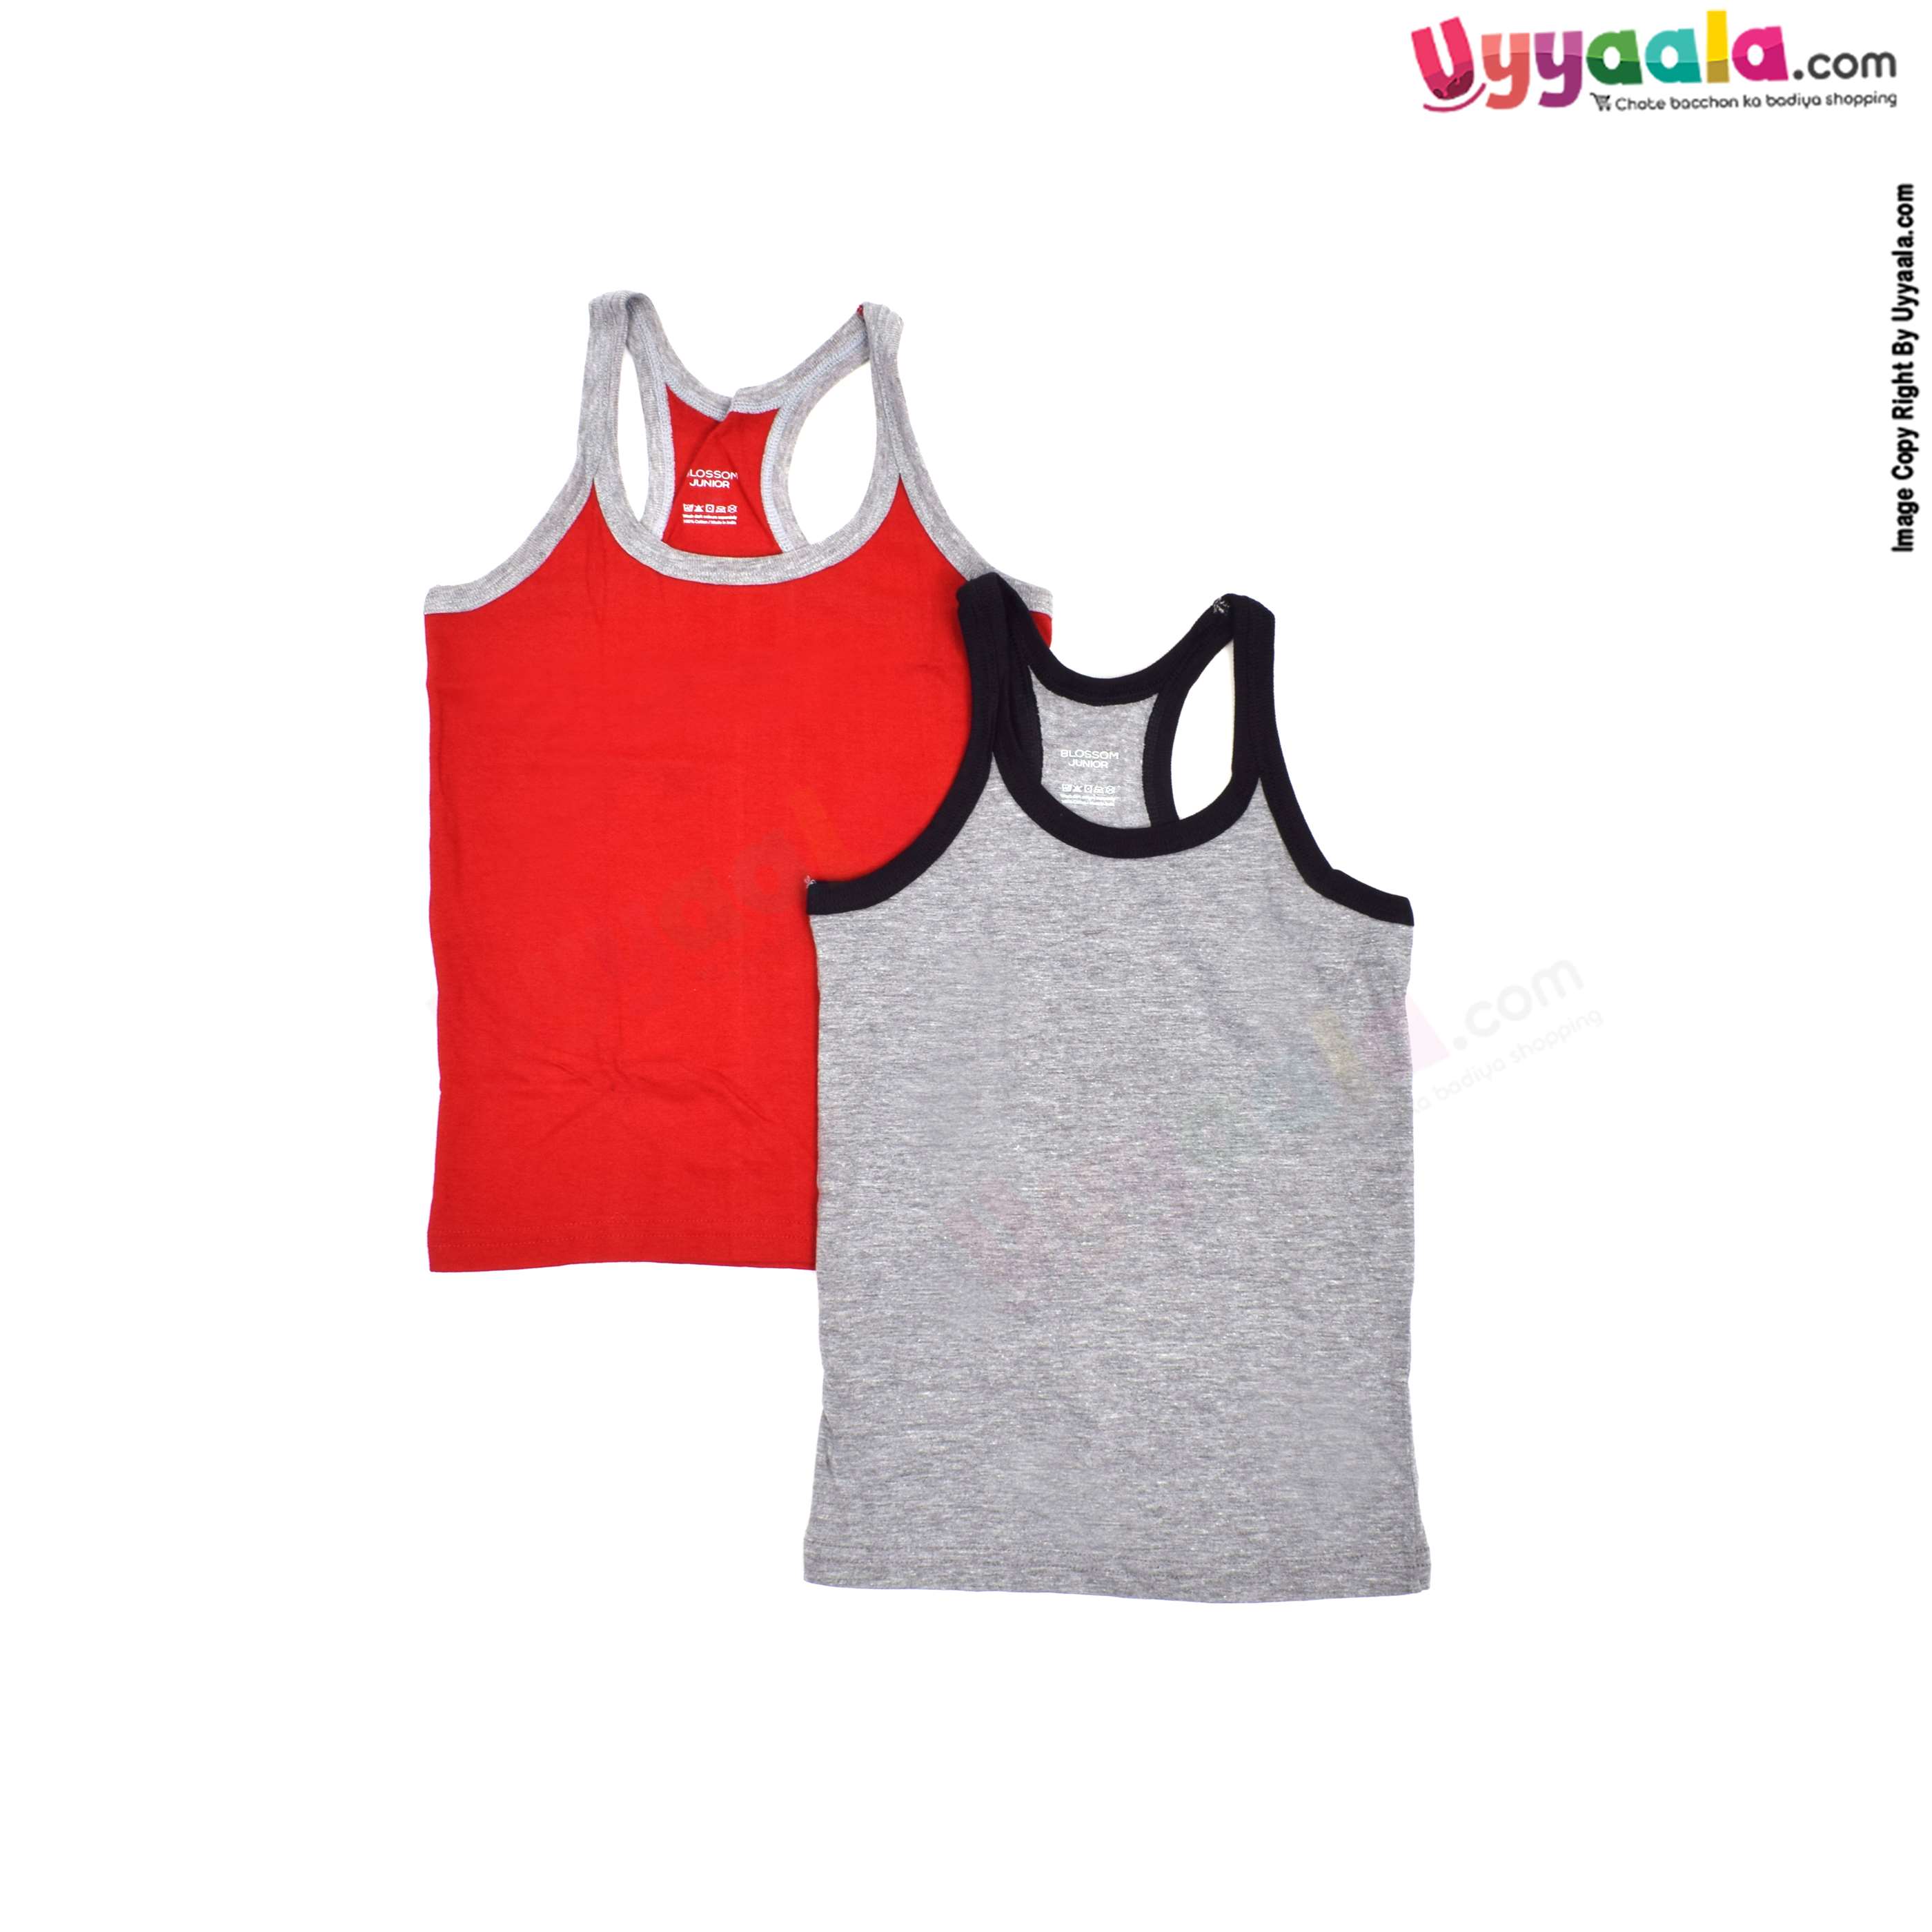 BLOSSOM JUNIOR Gym vest for boys, cotton pack of 2 - Grey & red